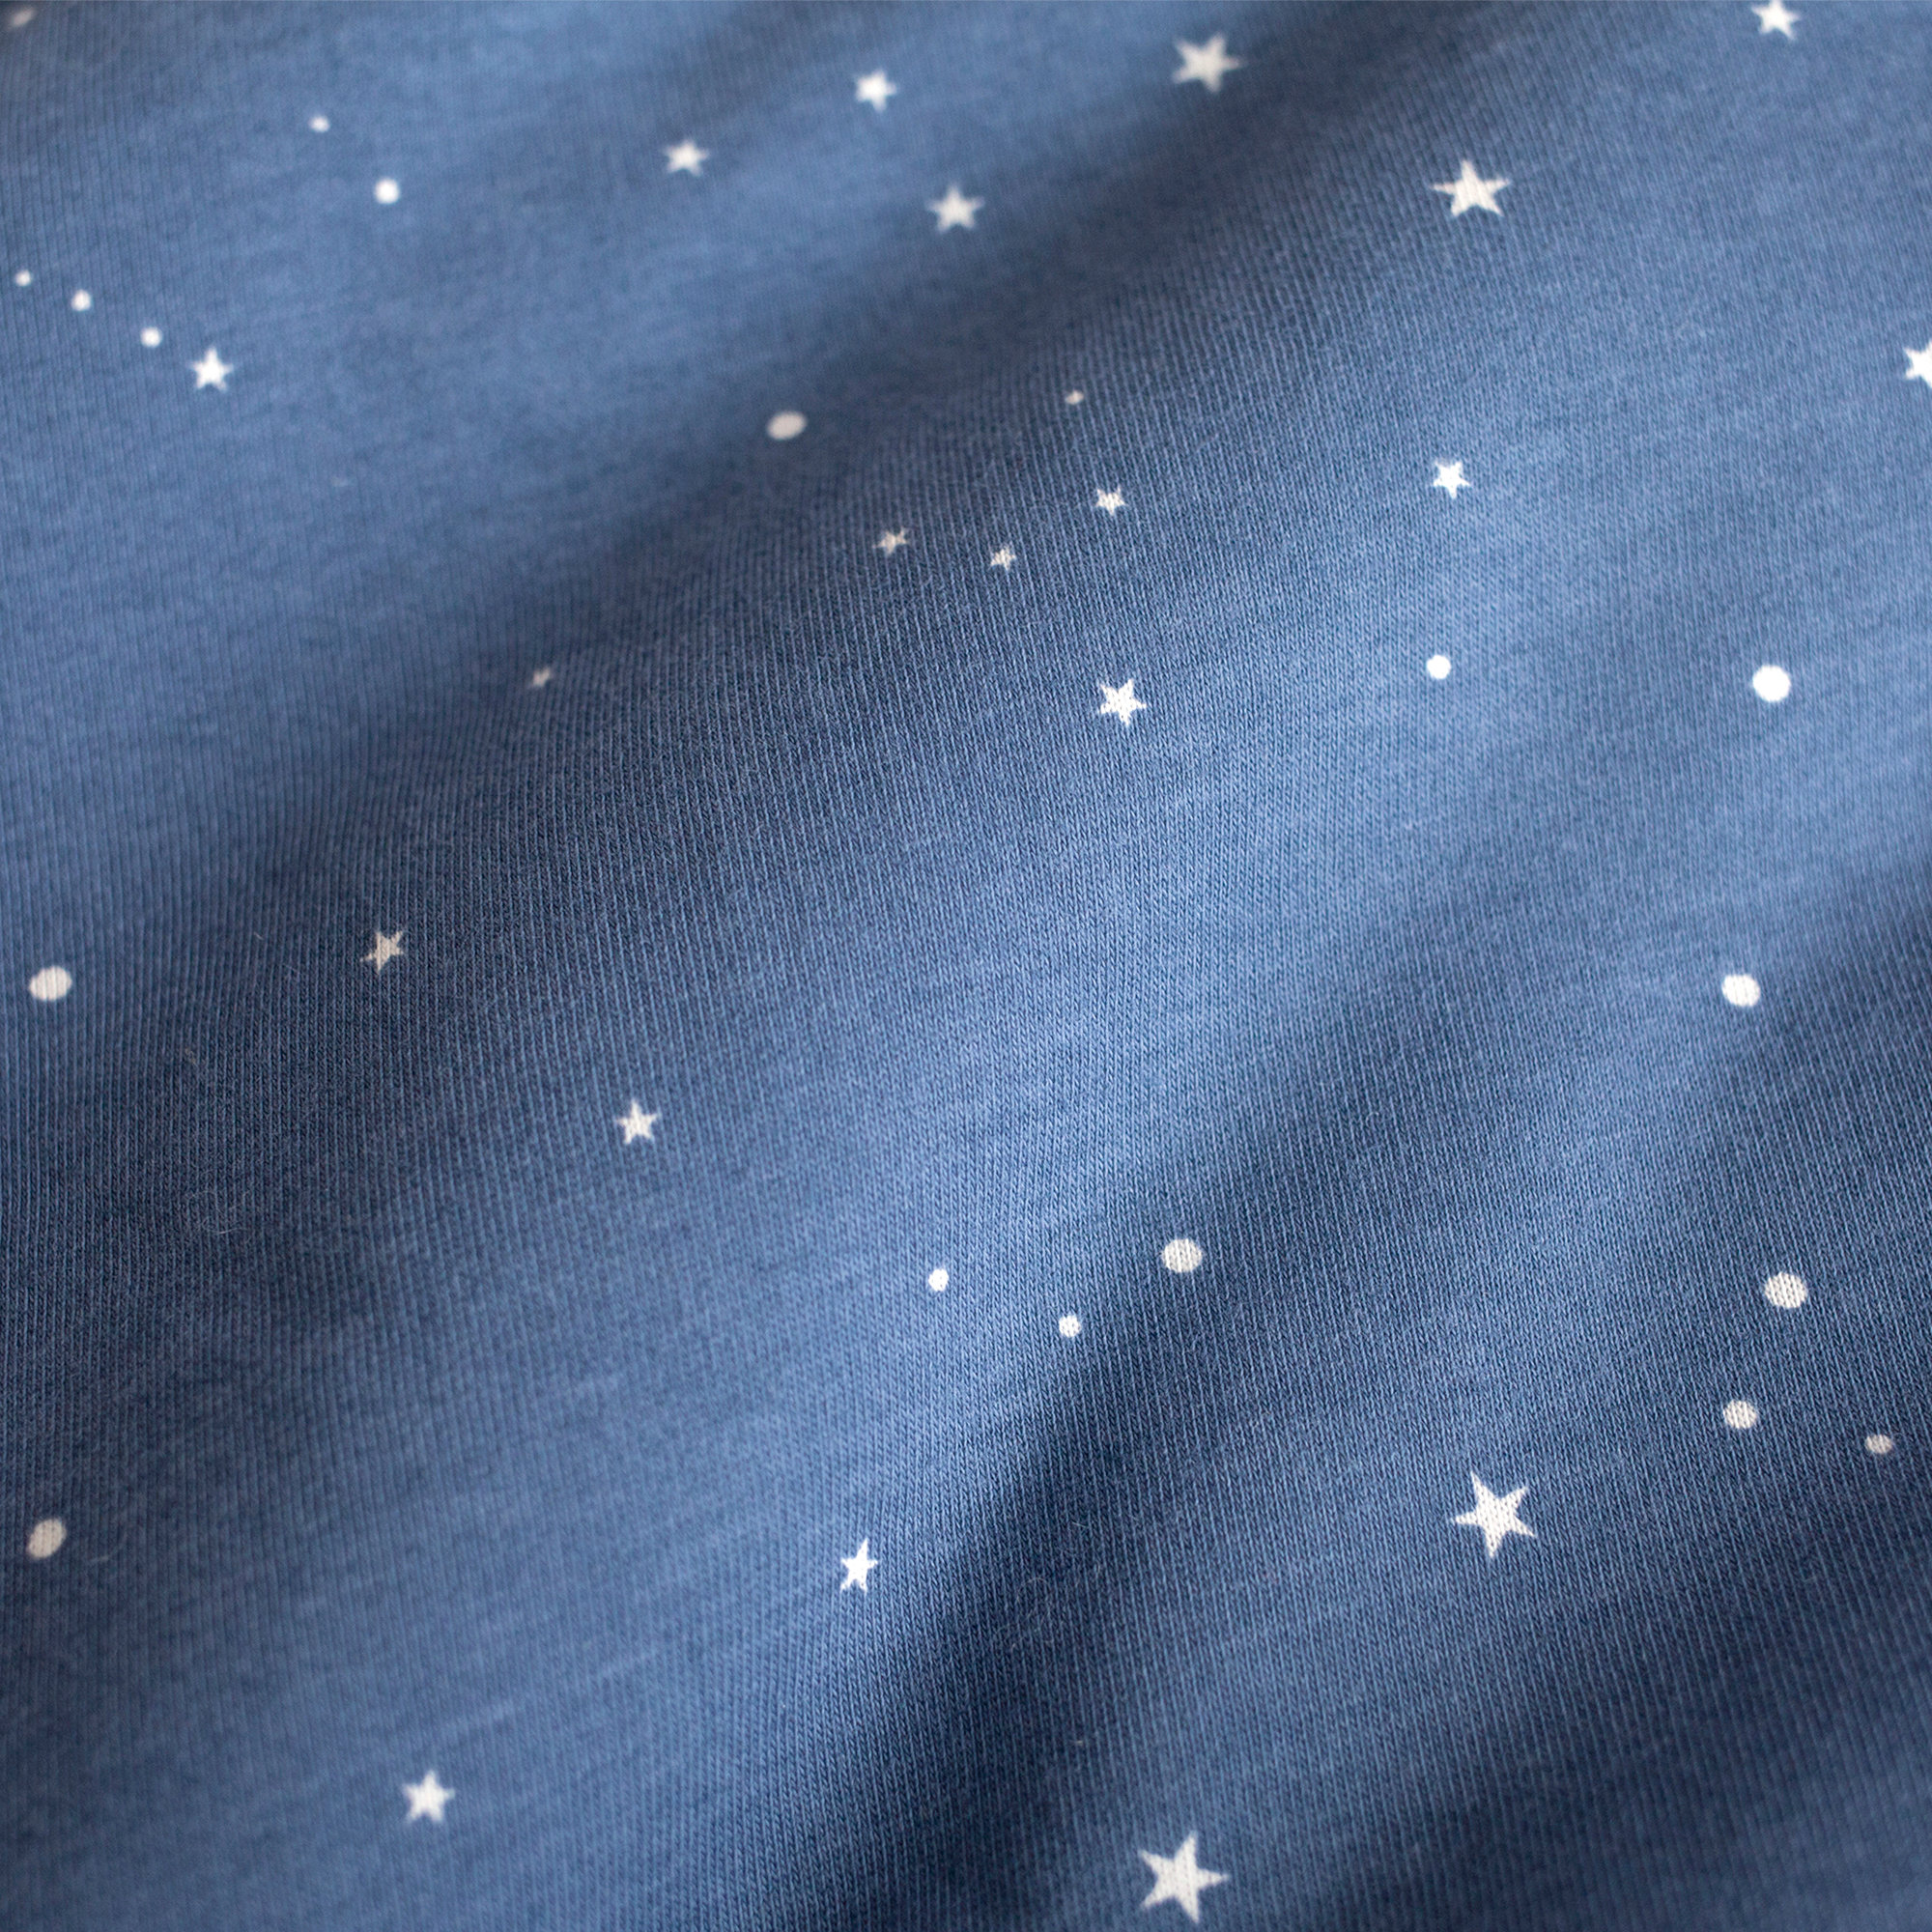 Protector de parque Pady jersey + jersey 75x95x28cm STARY Little stars print shade